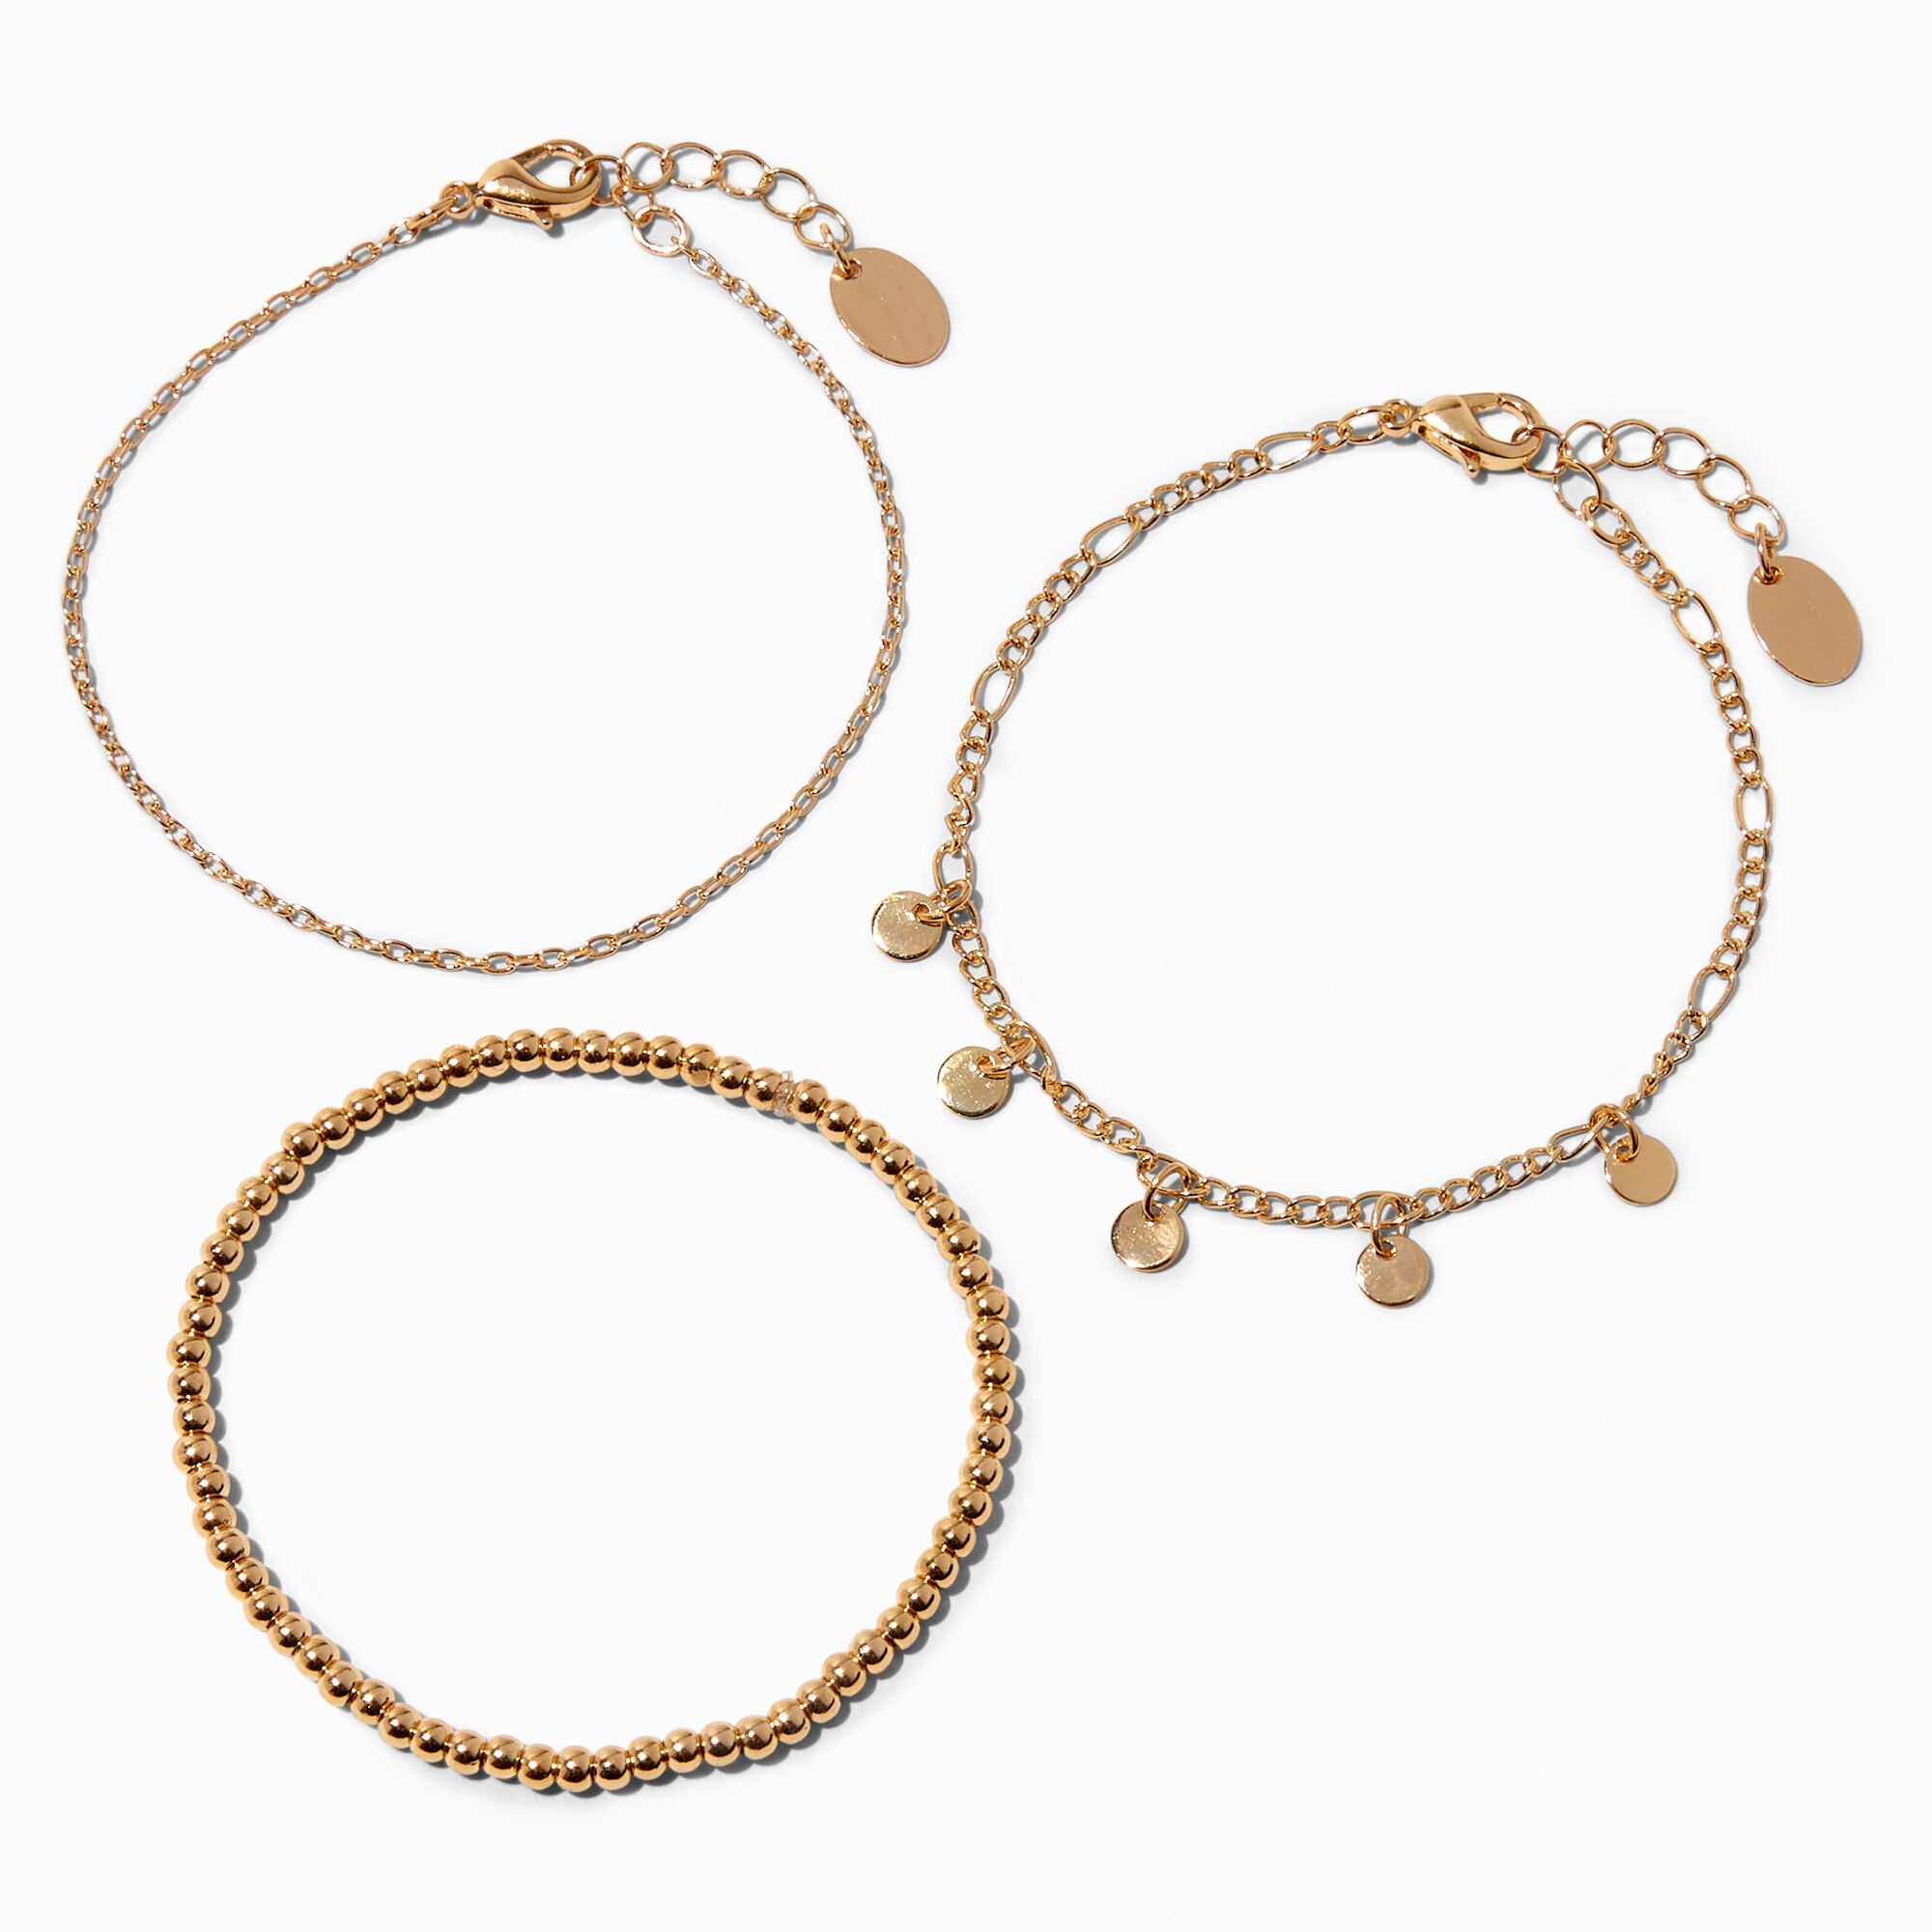 Monet Jewelry Two Tone 3-pc. Bracelet Set, Color: Two Tone - JCPenney